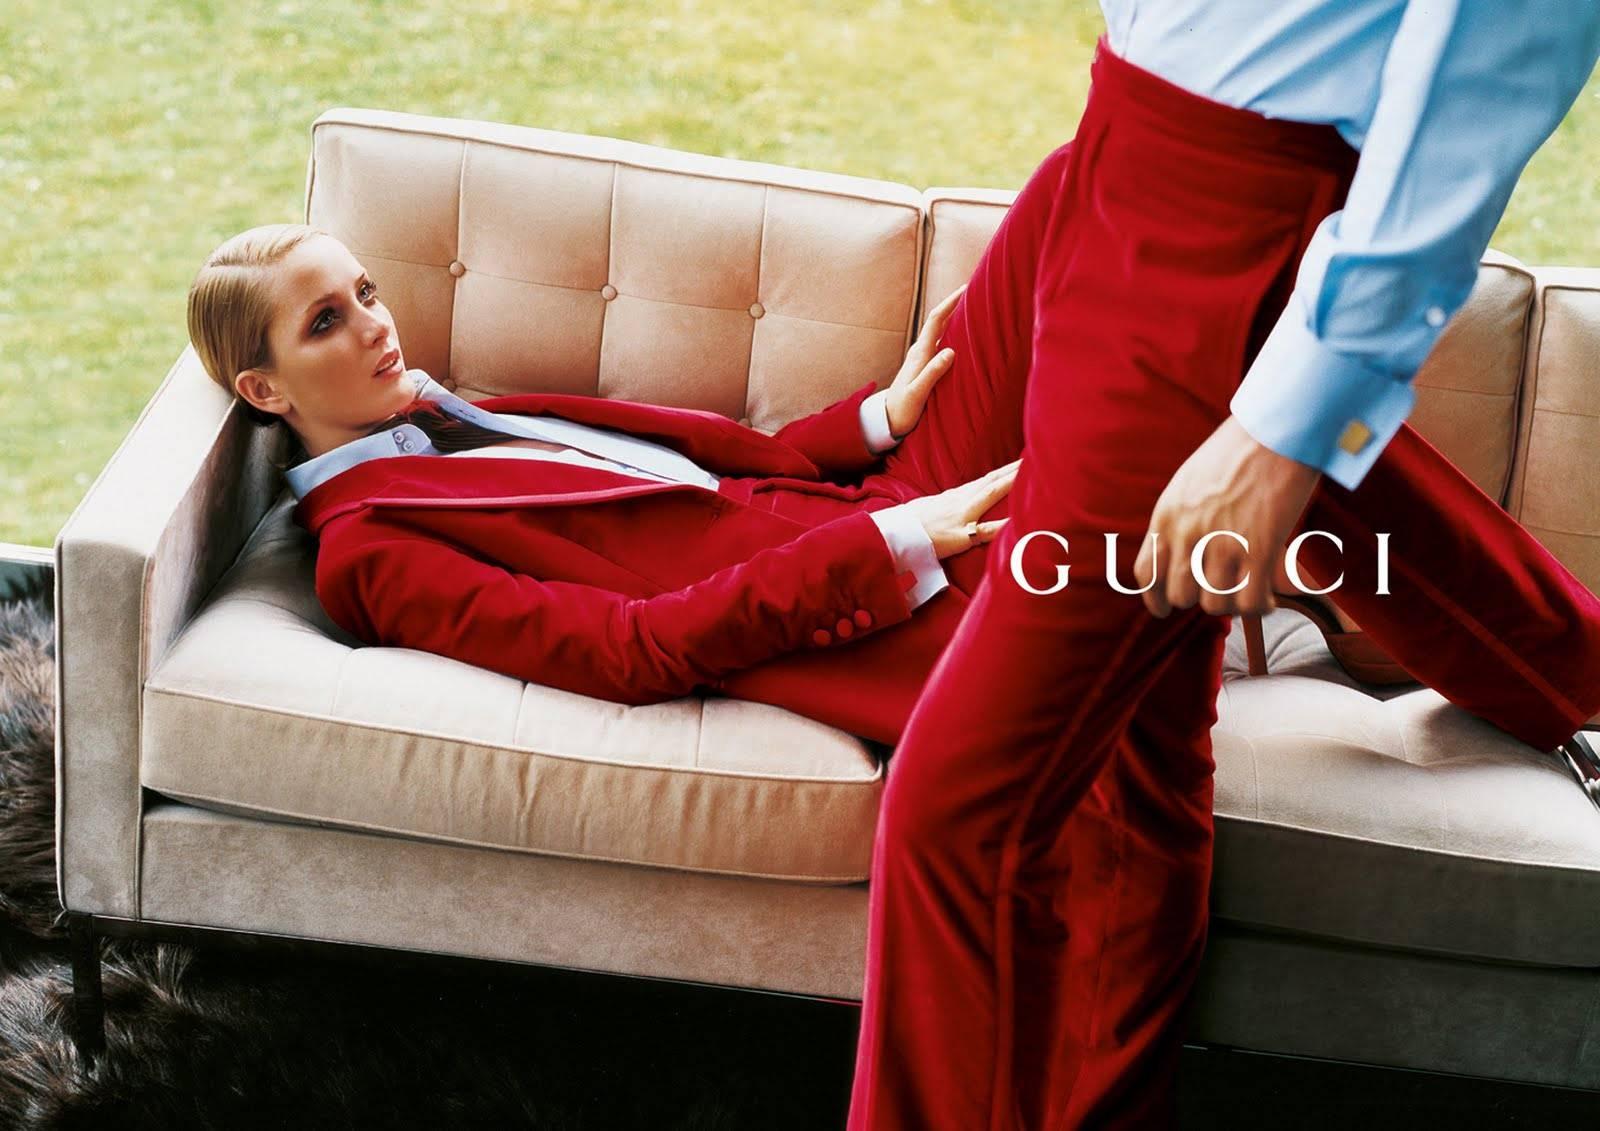 Tom Ford for Gucci Iconic Red Velvet Tuxedo Pants with Satin Trim, Fall 1996 1